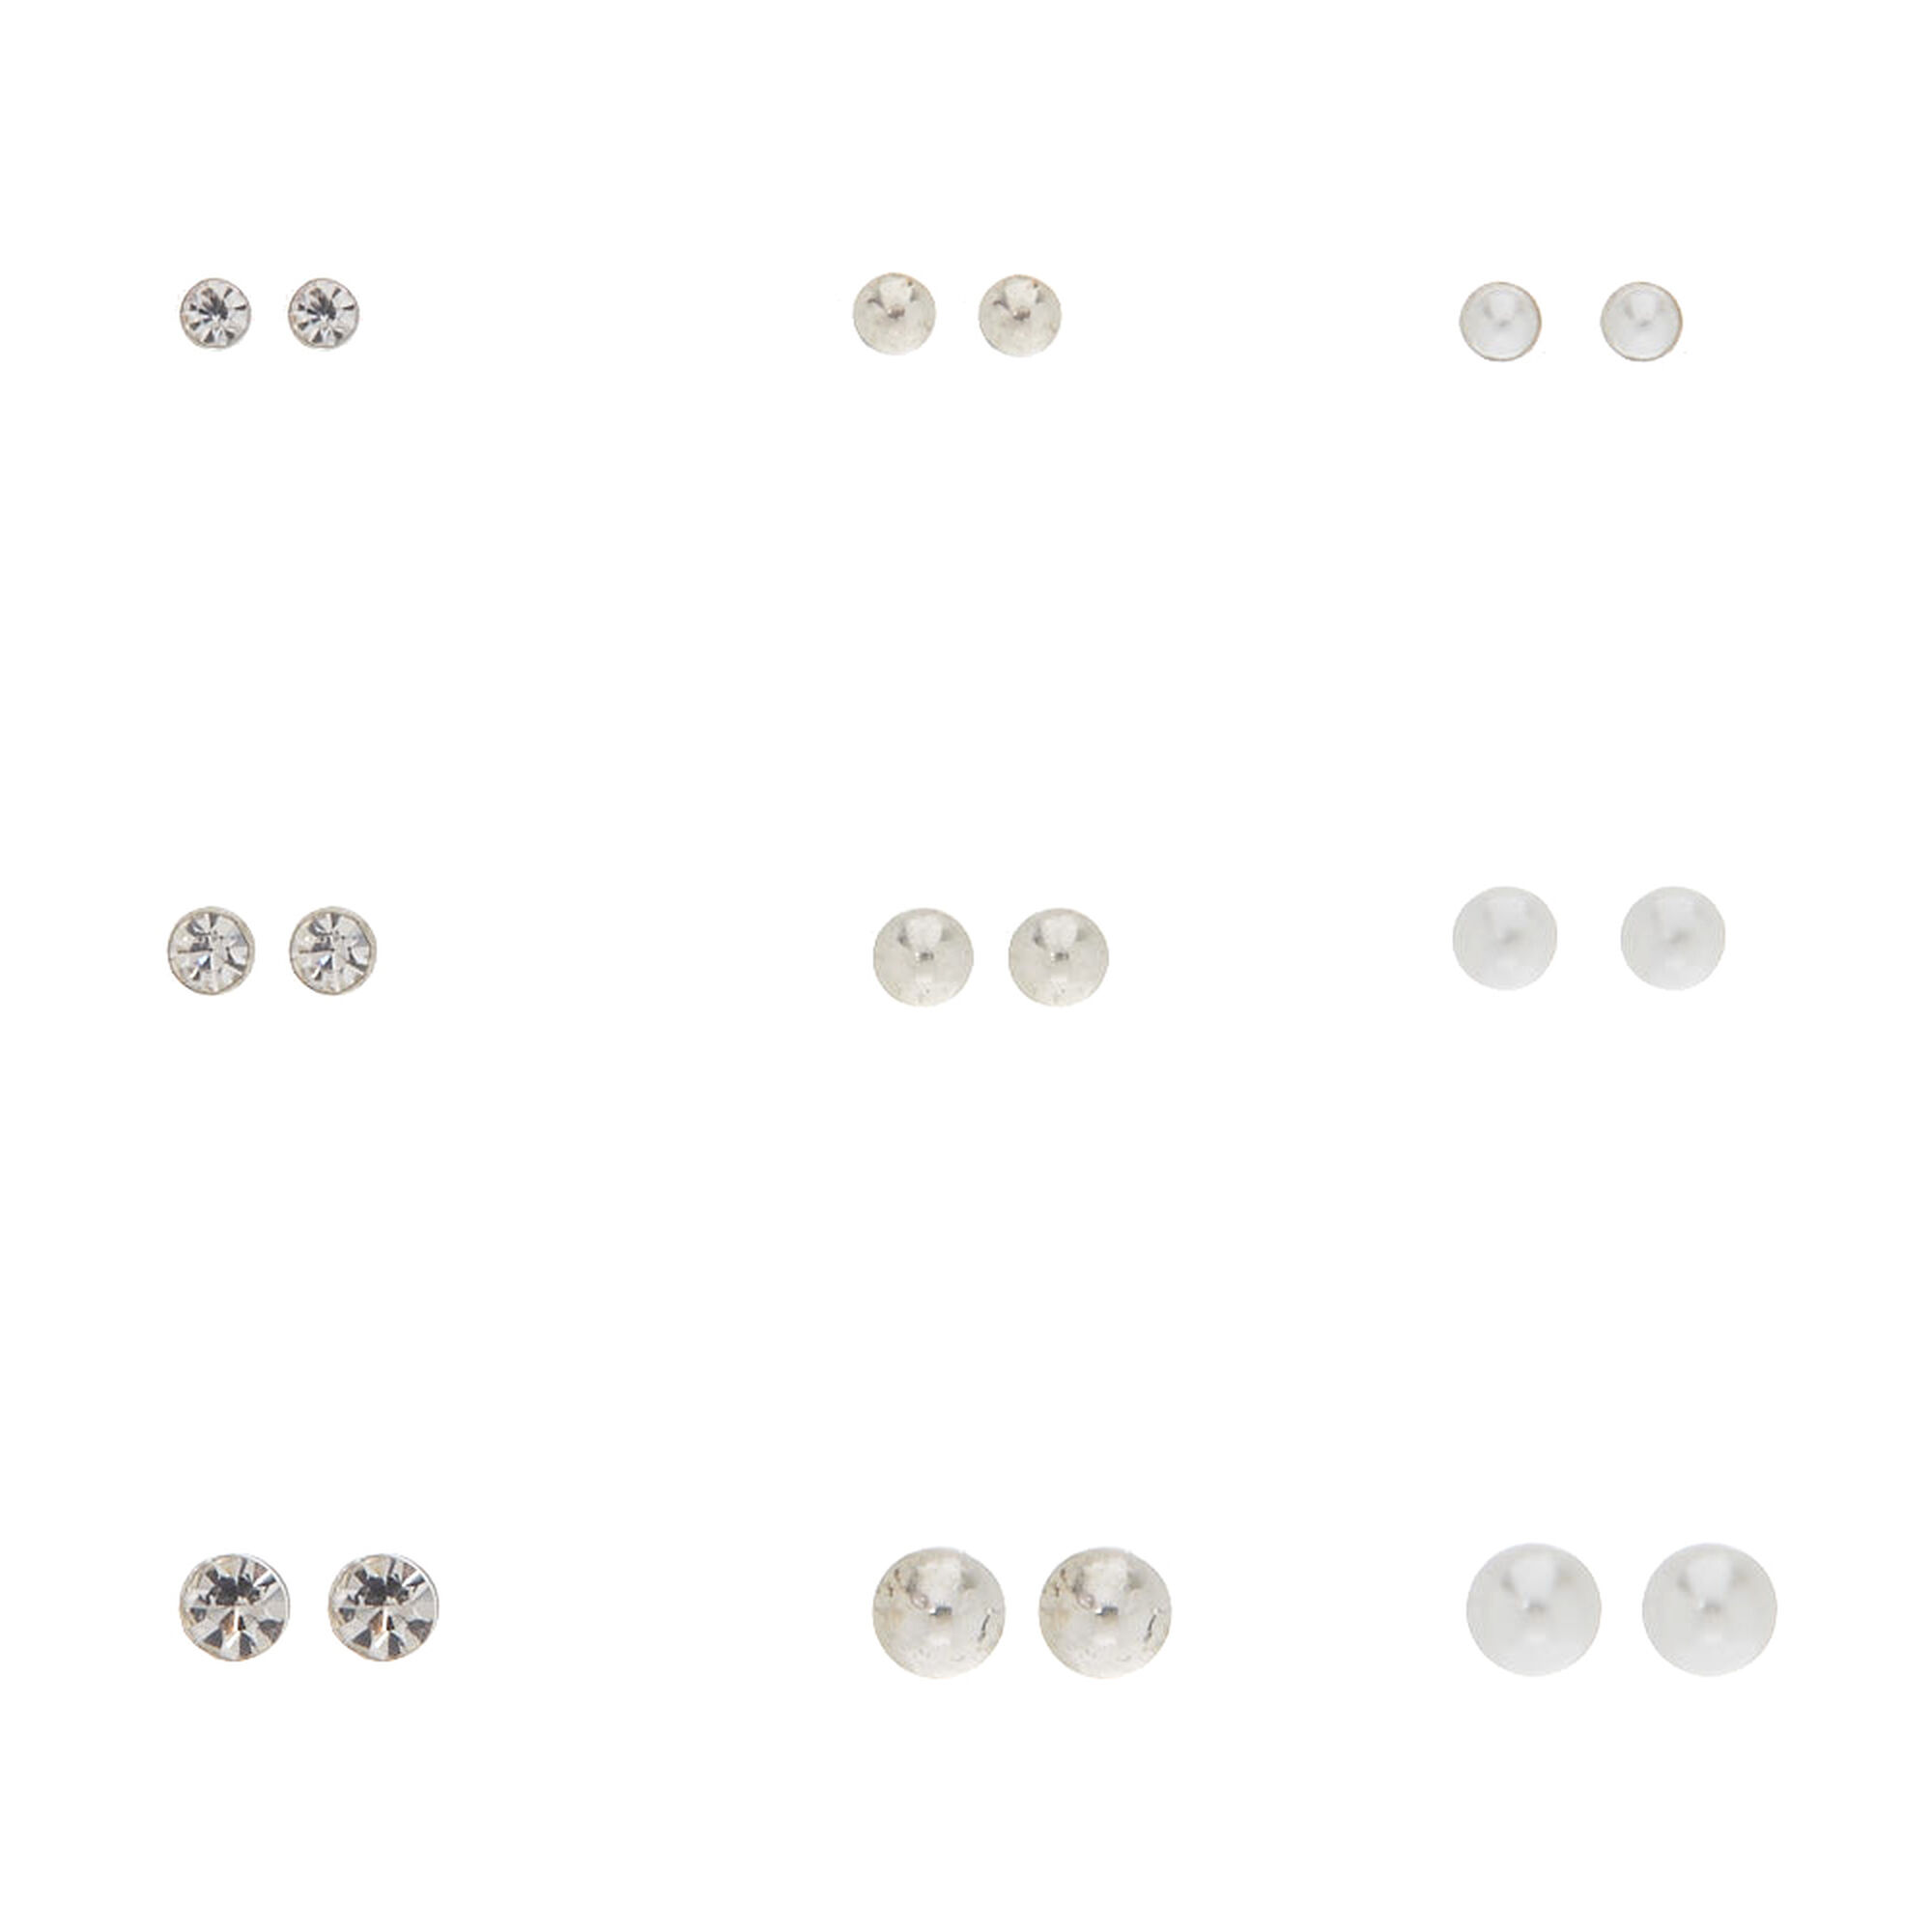 View Claires 9 Pack Graduated Stud Earrings information